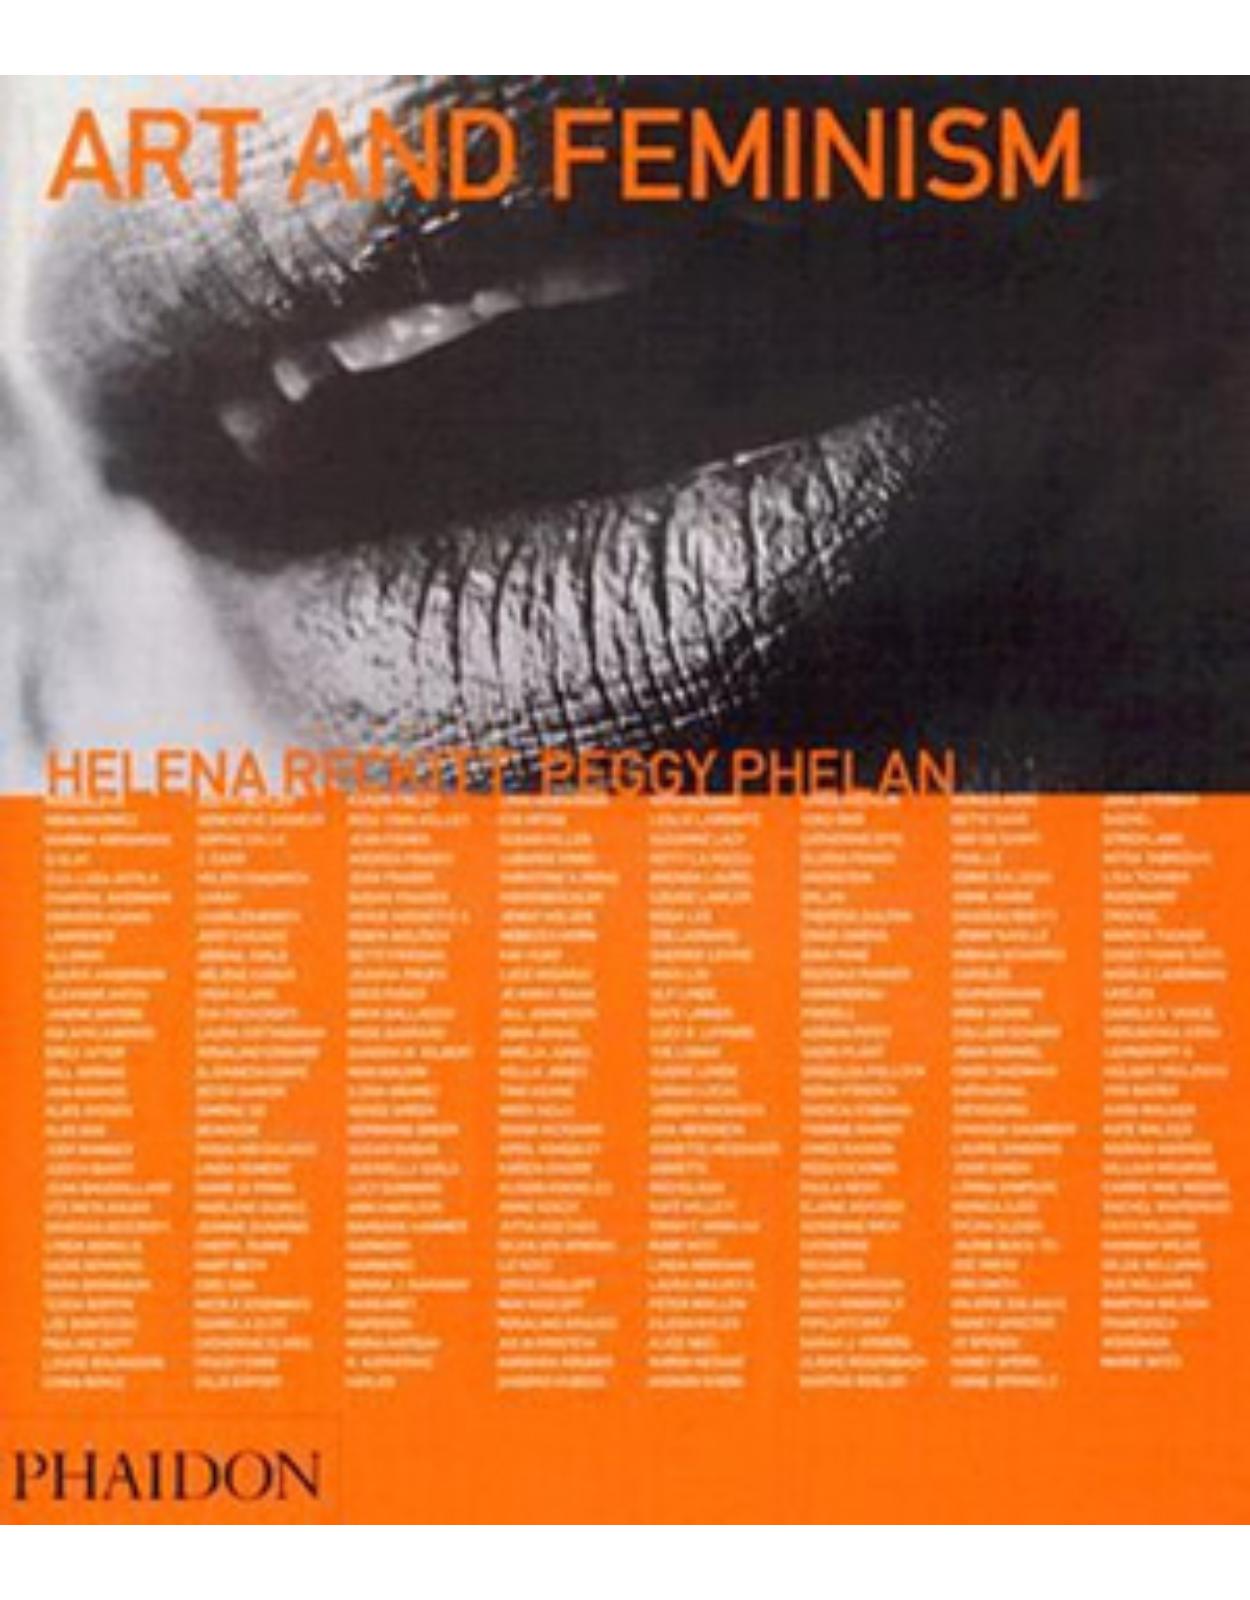 Art and Feminism (Themes & Movements)